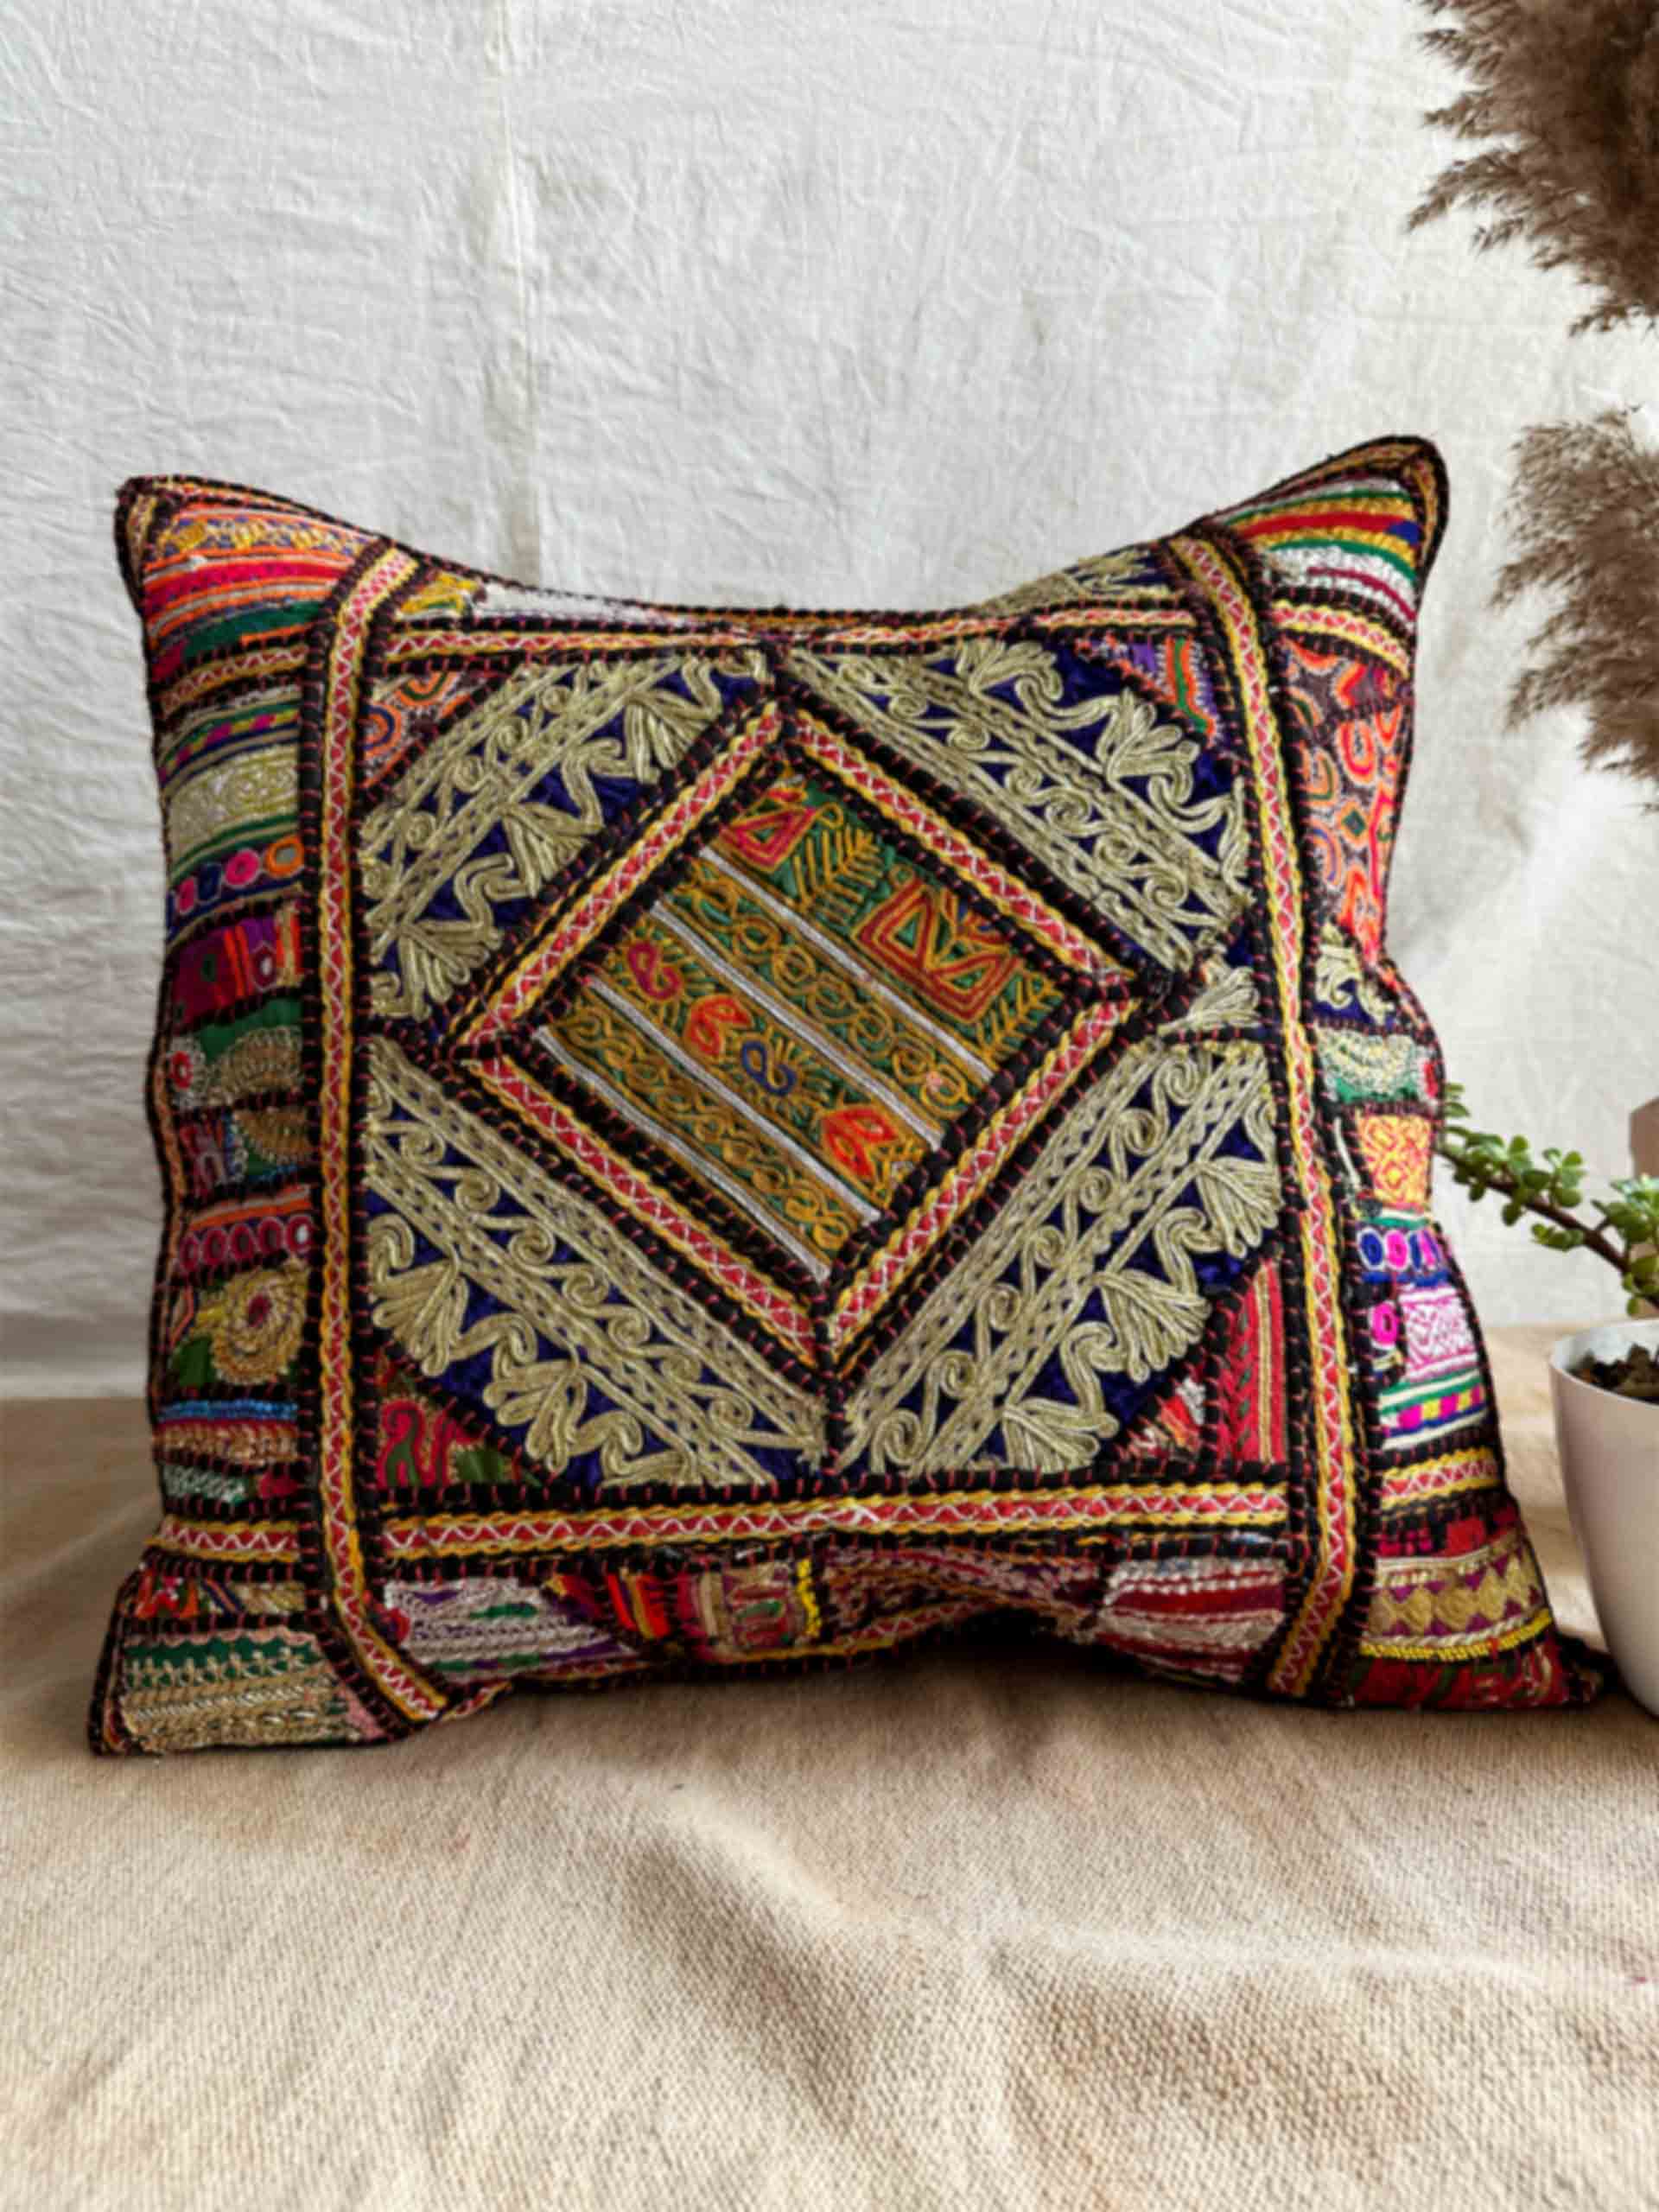 Kirti - hand embroidered cushion cover 18X18